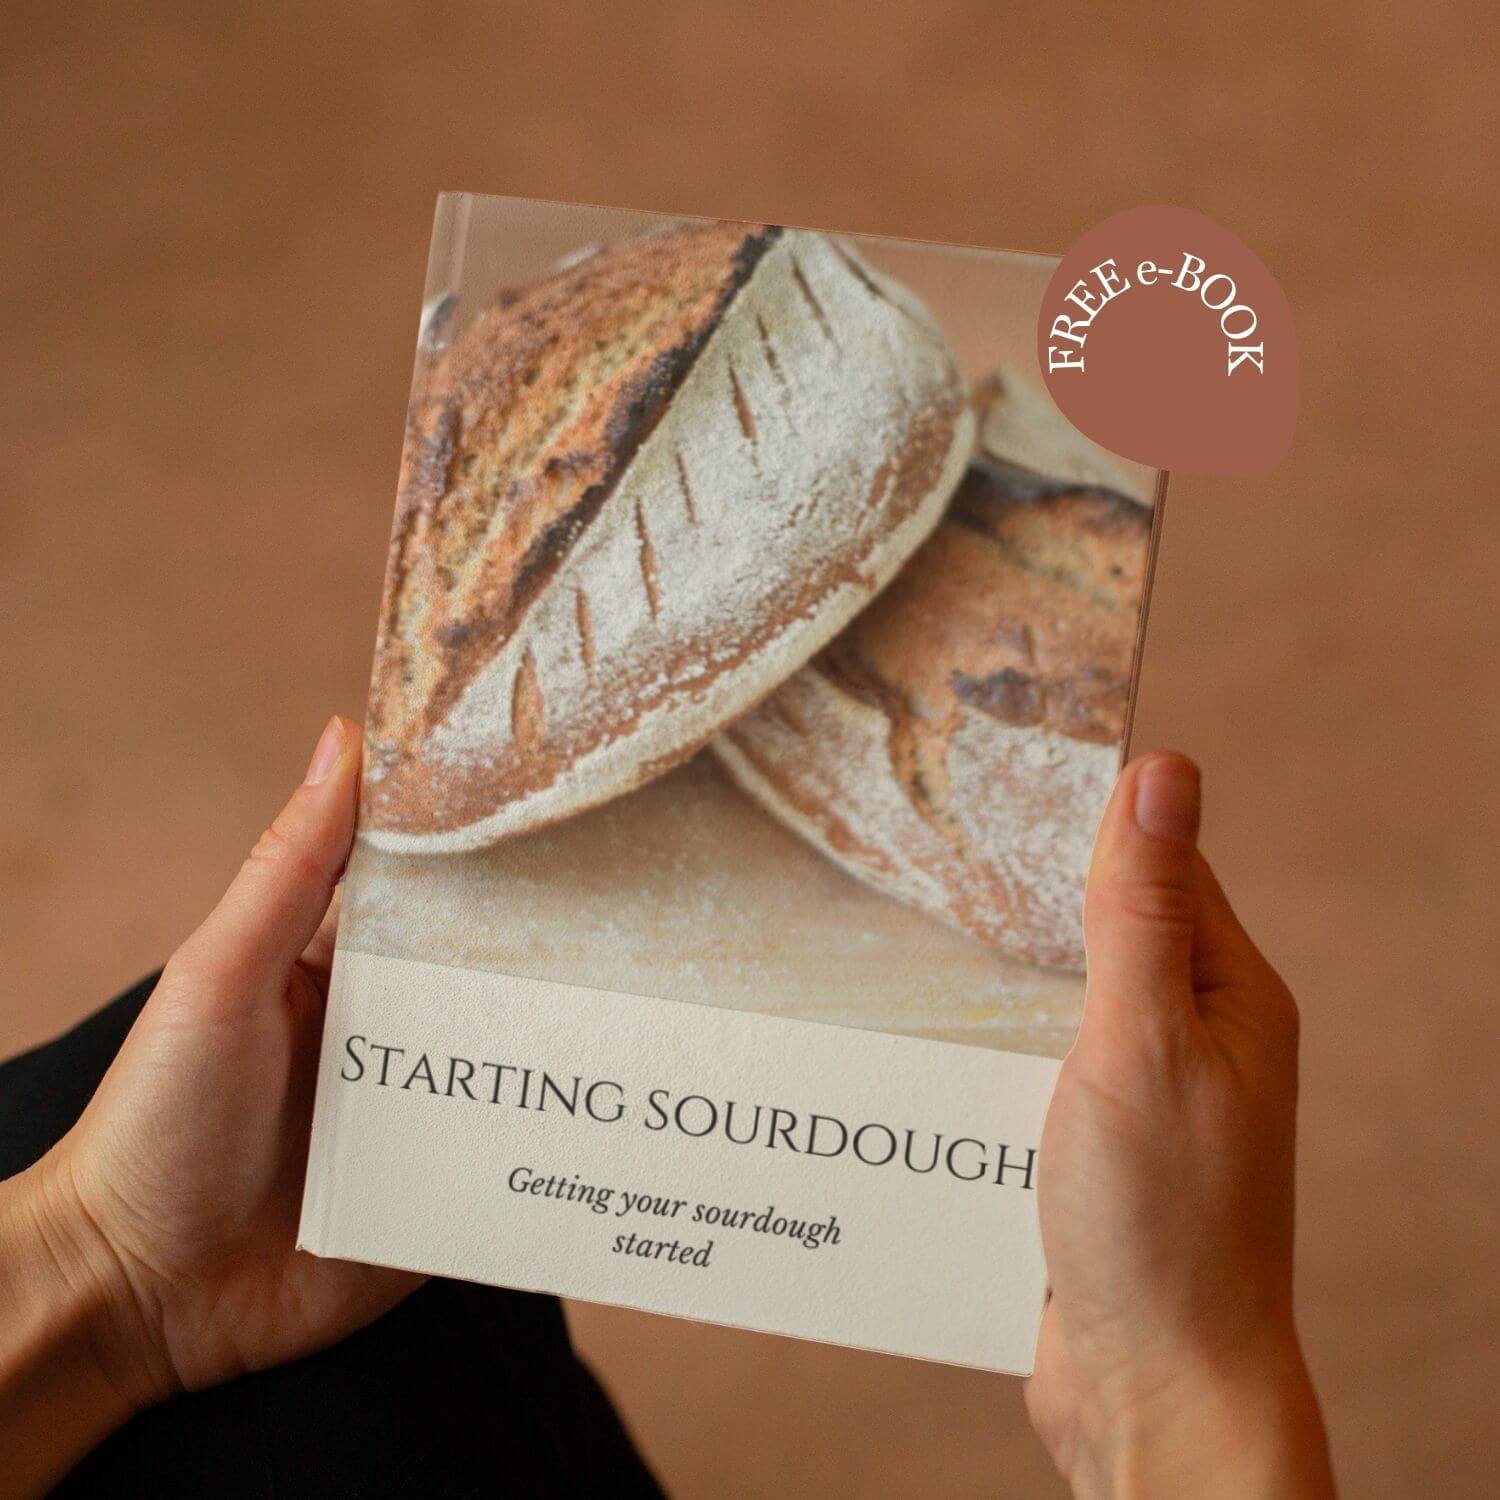 Two hands holding the "Starting Sourdough" book against a rust colored background